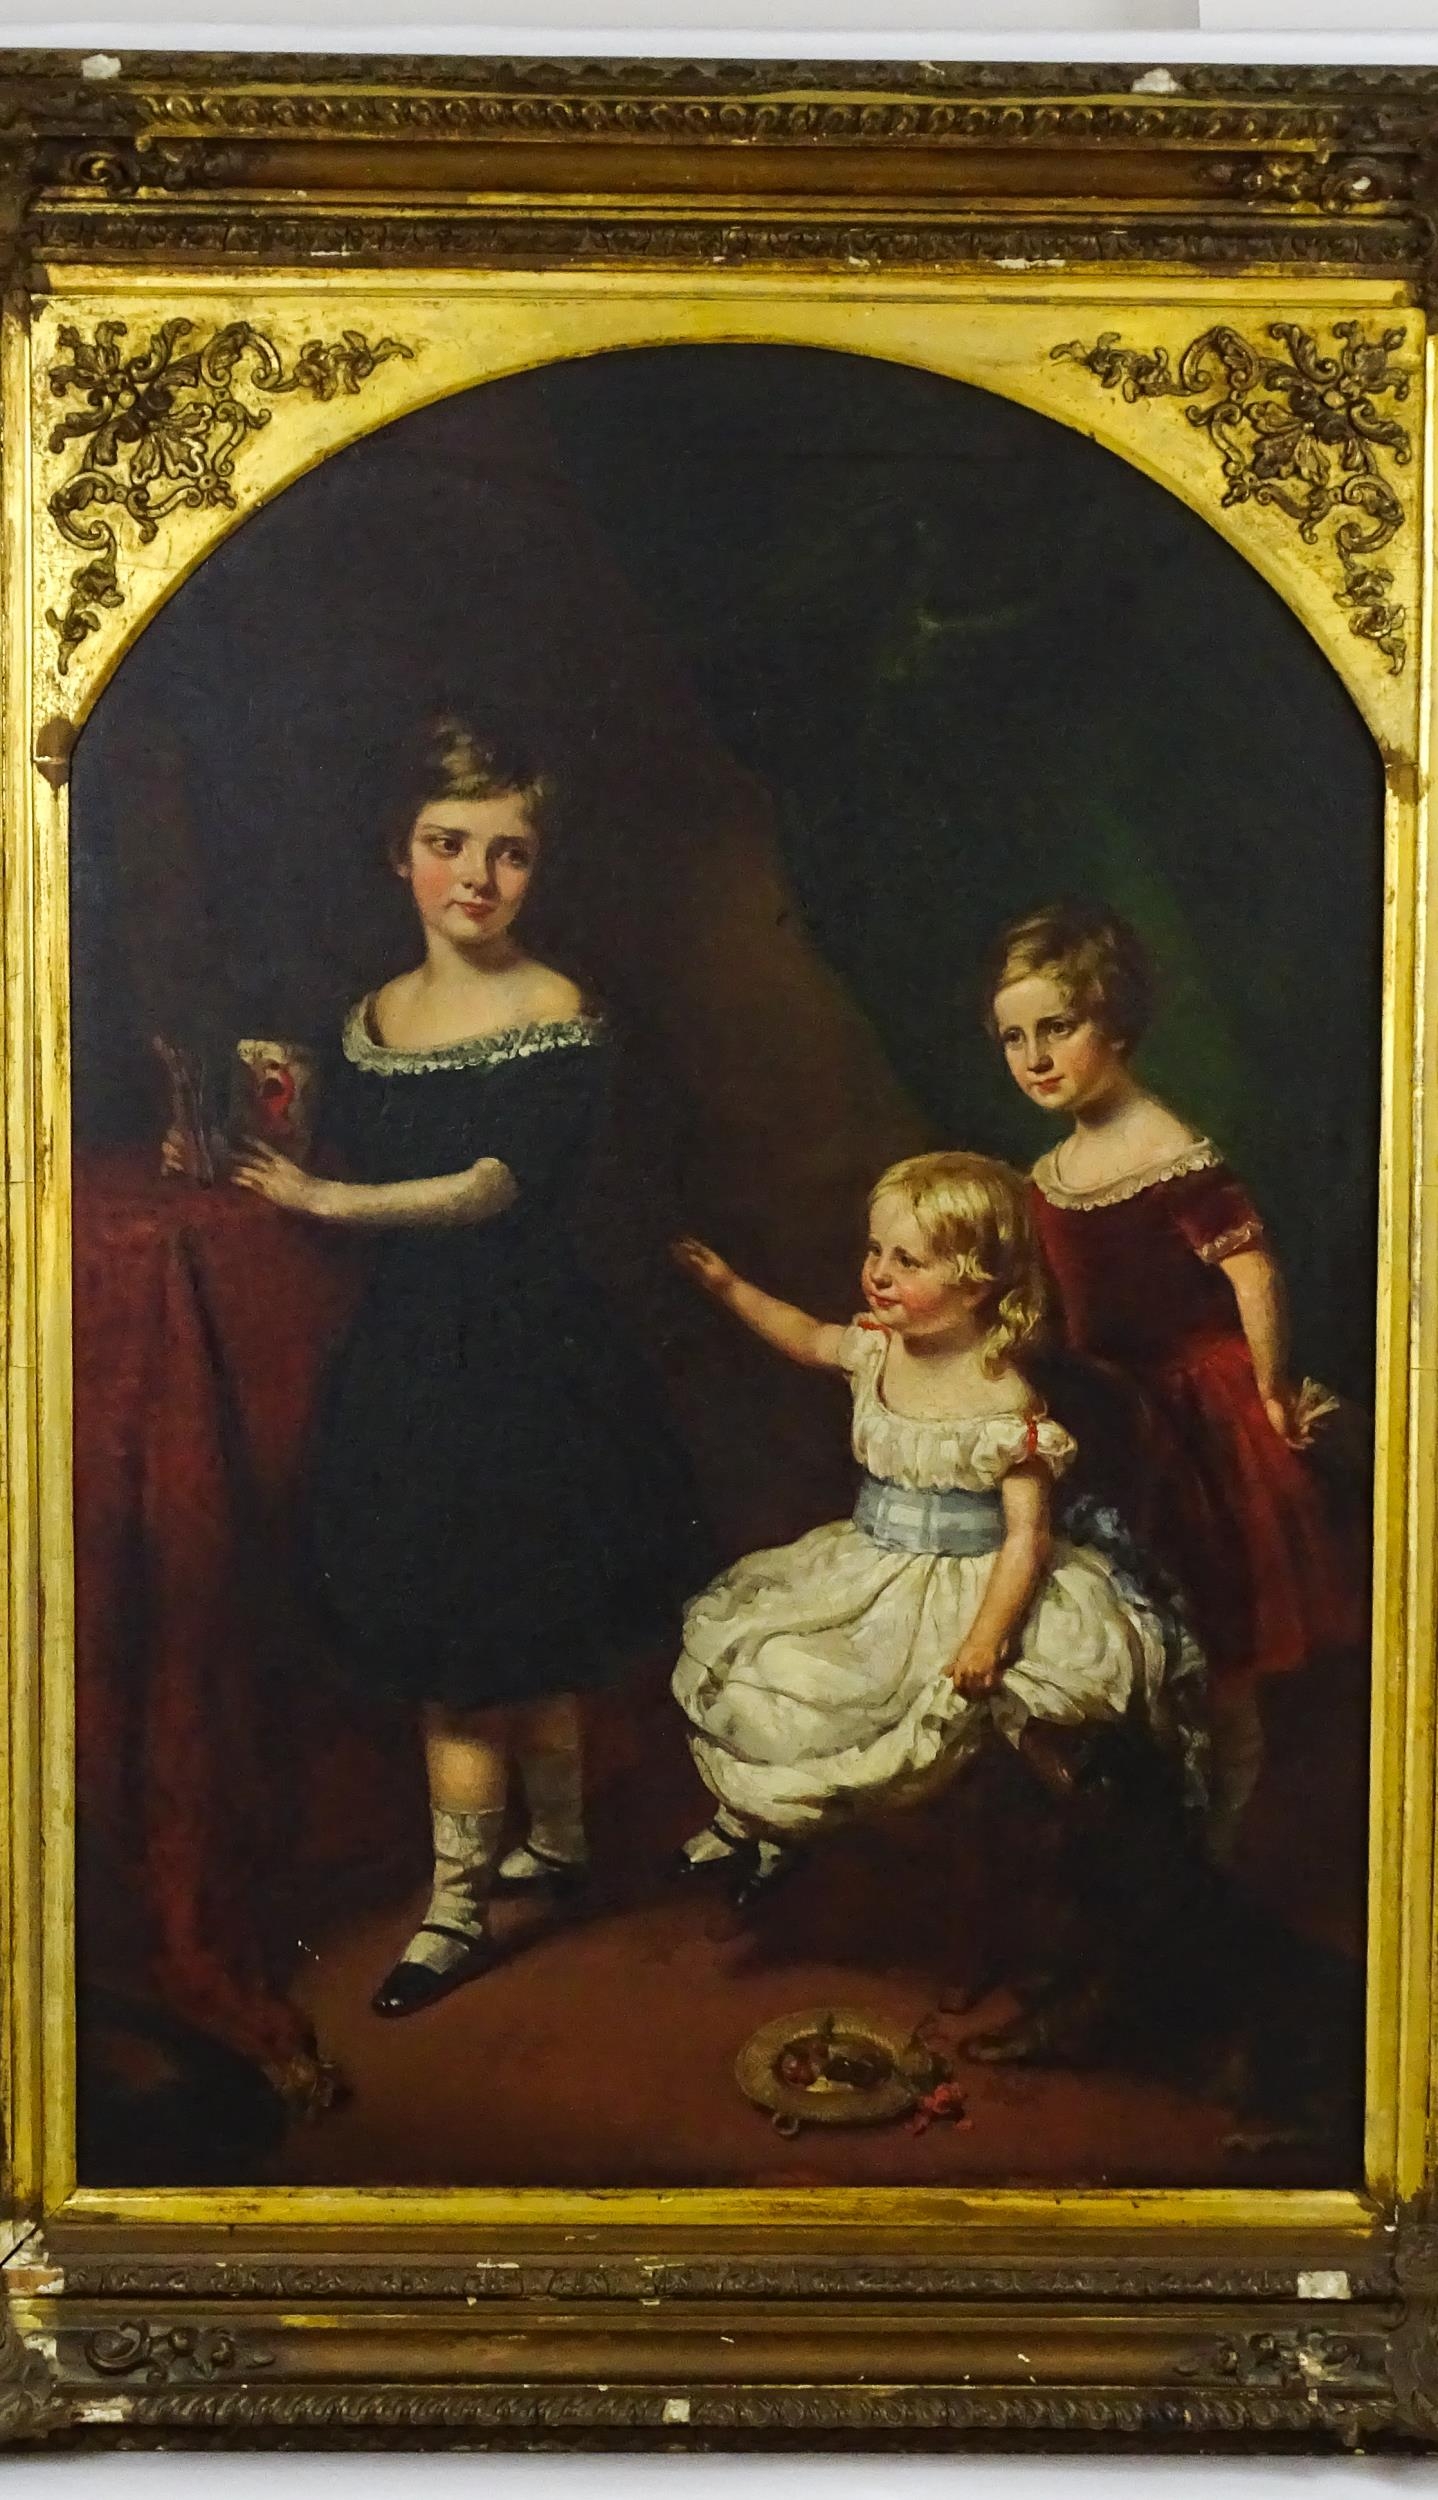 19th century, English School, Oil on canvas, A portrait of three children and a dog. Approx. 31" x - Image 4 of 4